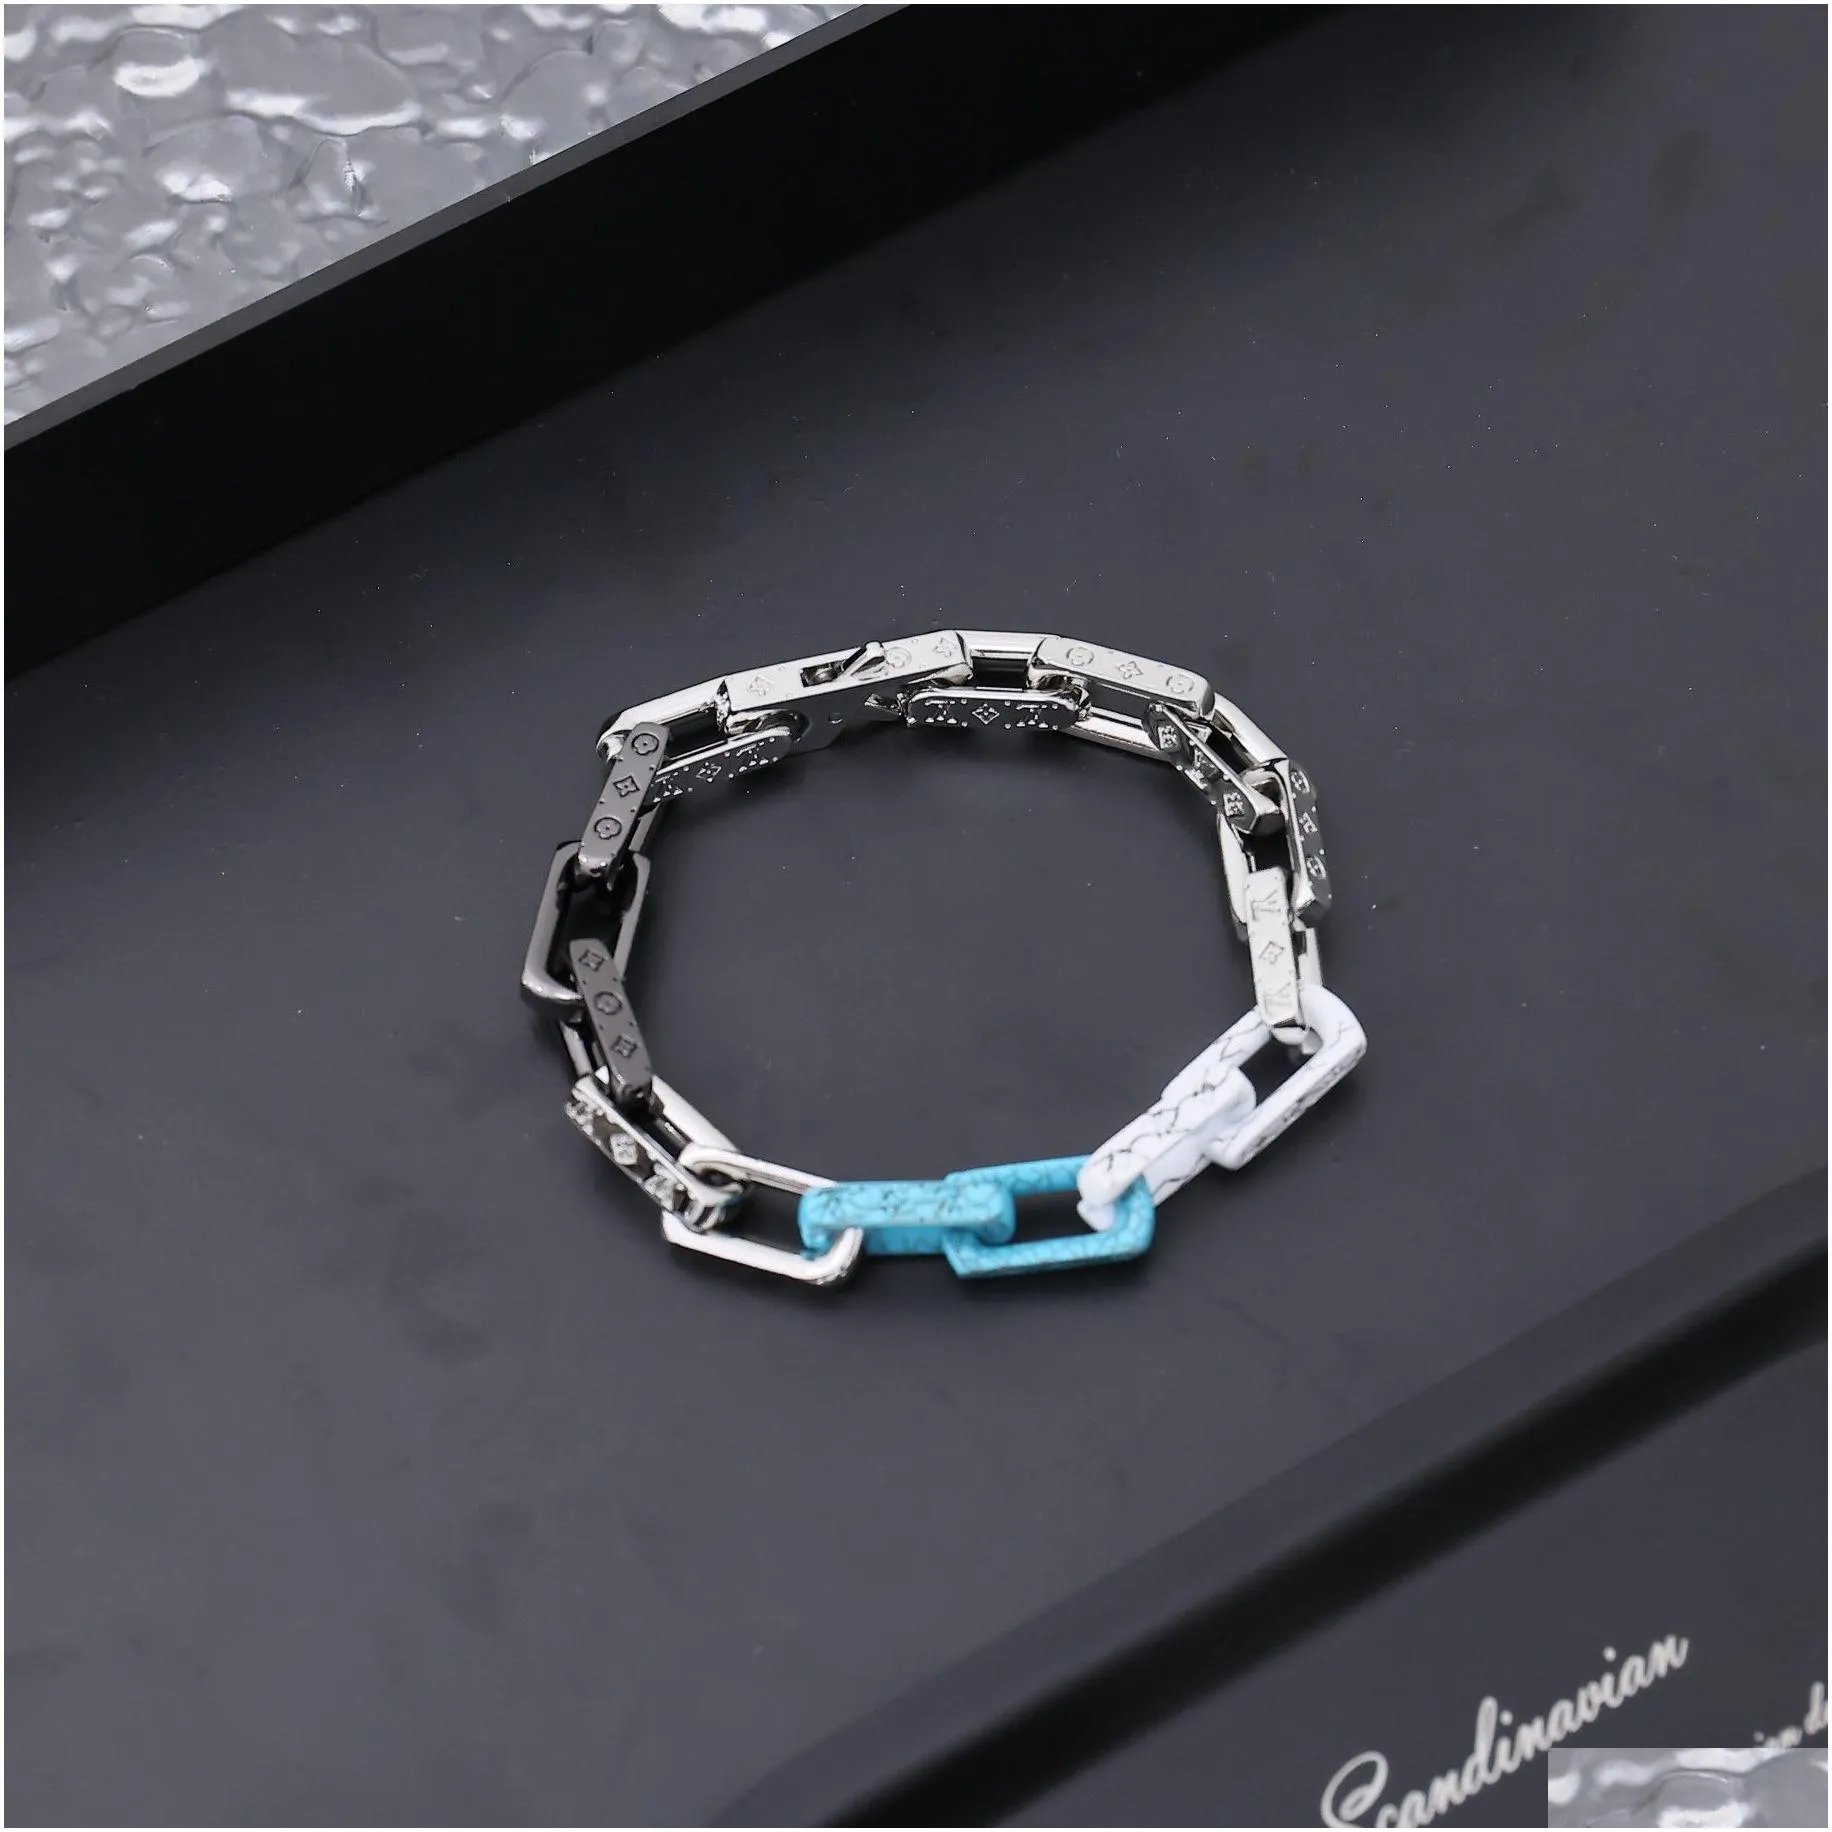 necklace bracelet designer bracelet designer jewelry luxury black silver blue classic monogram chain for men and women chinese top quality gift goth chic